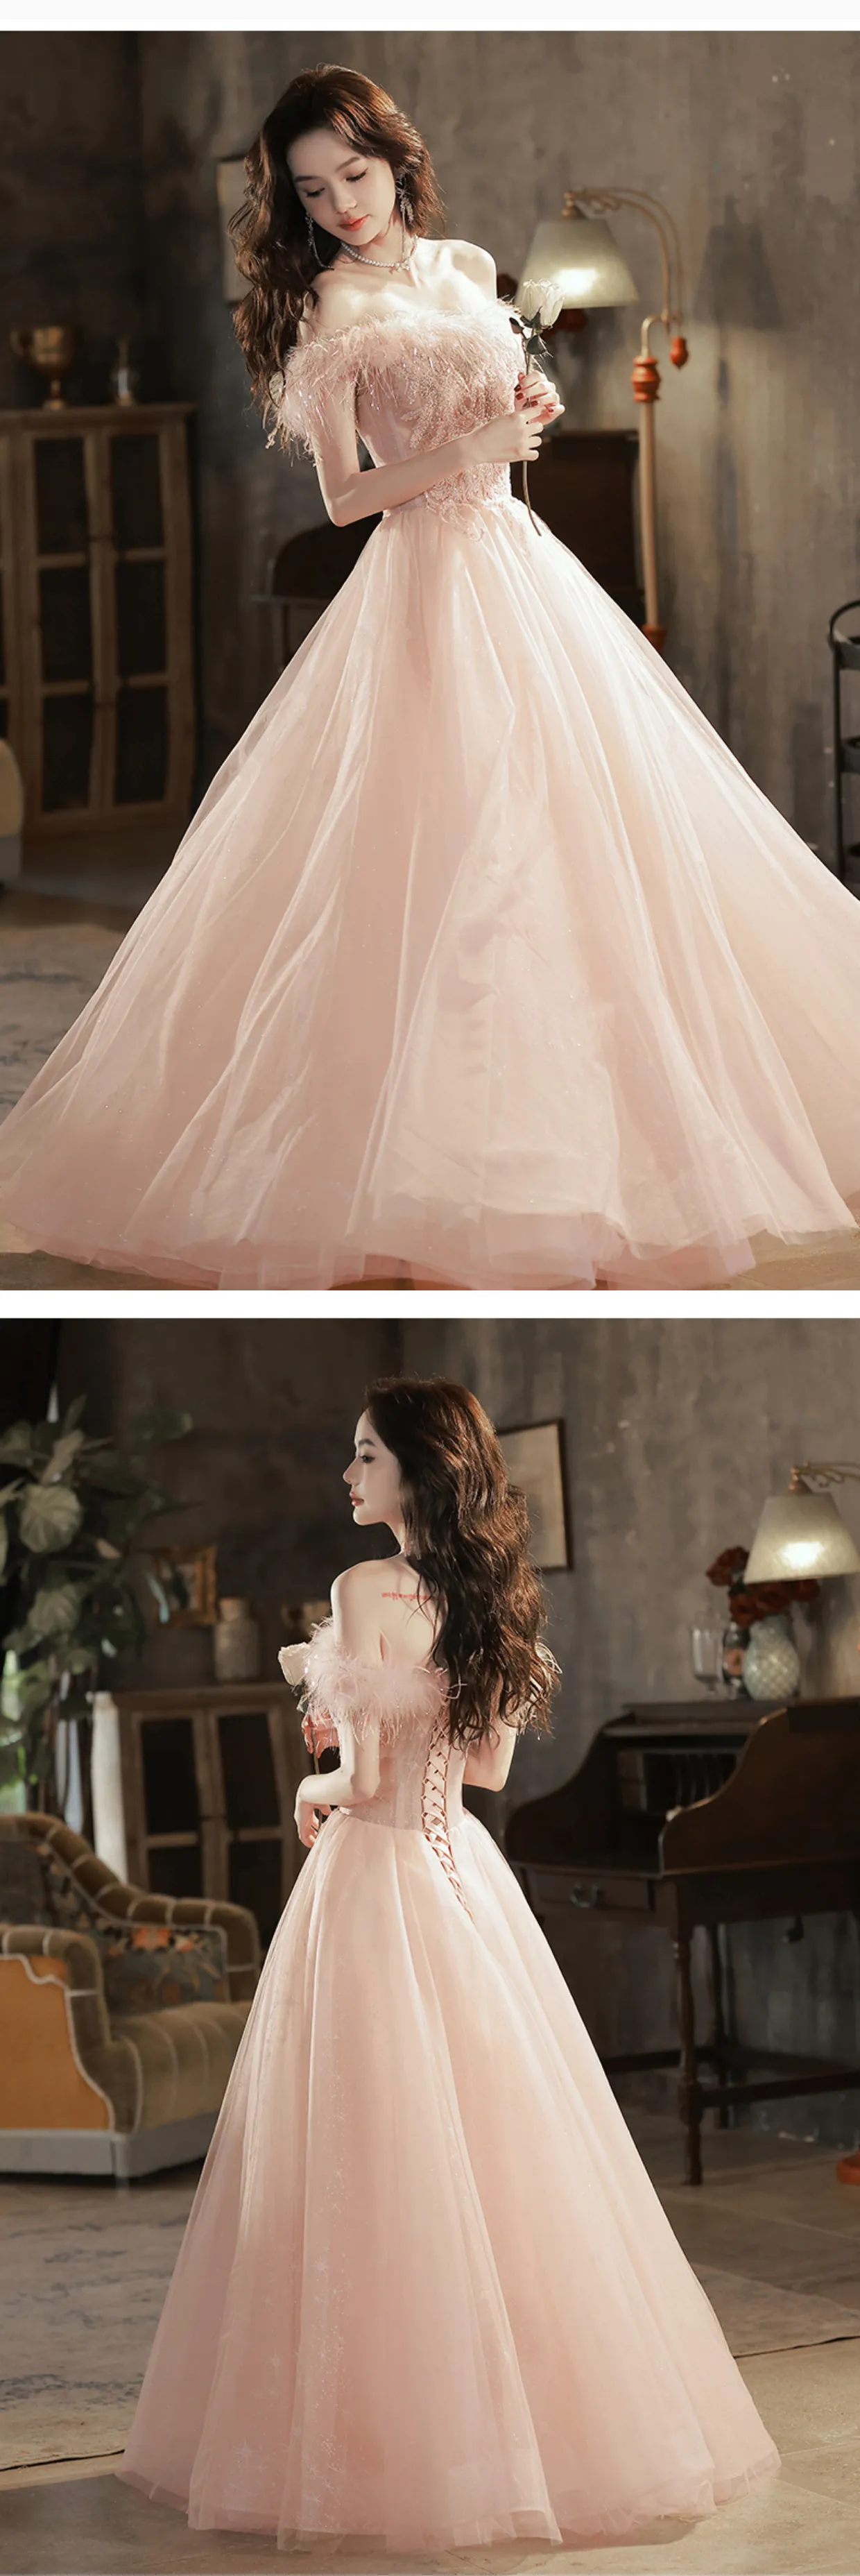 Pink-Off-Shoulder-Feather-Cocktail-Party-Prom-Dress-Evening-Gown13